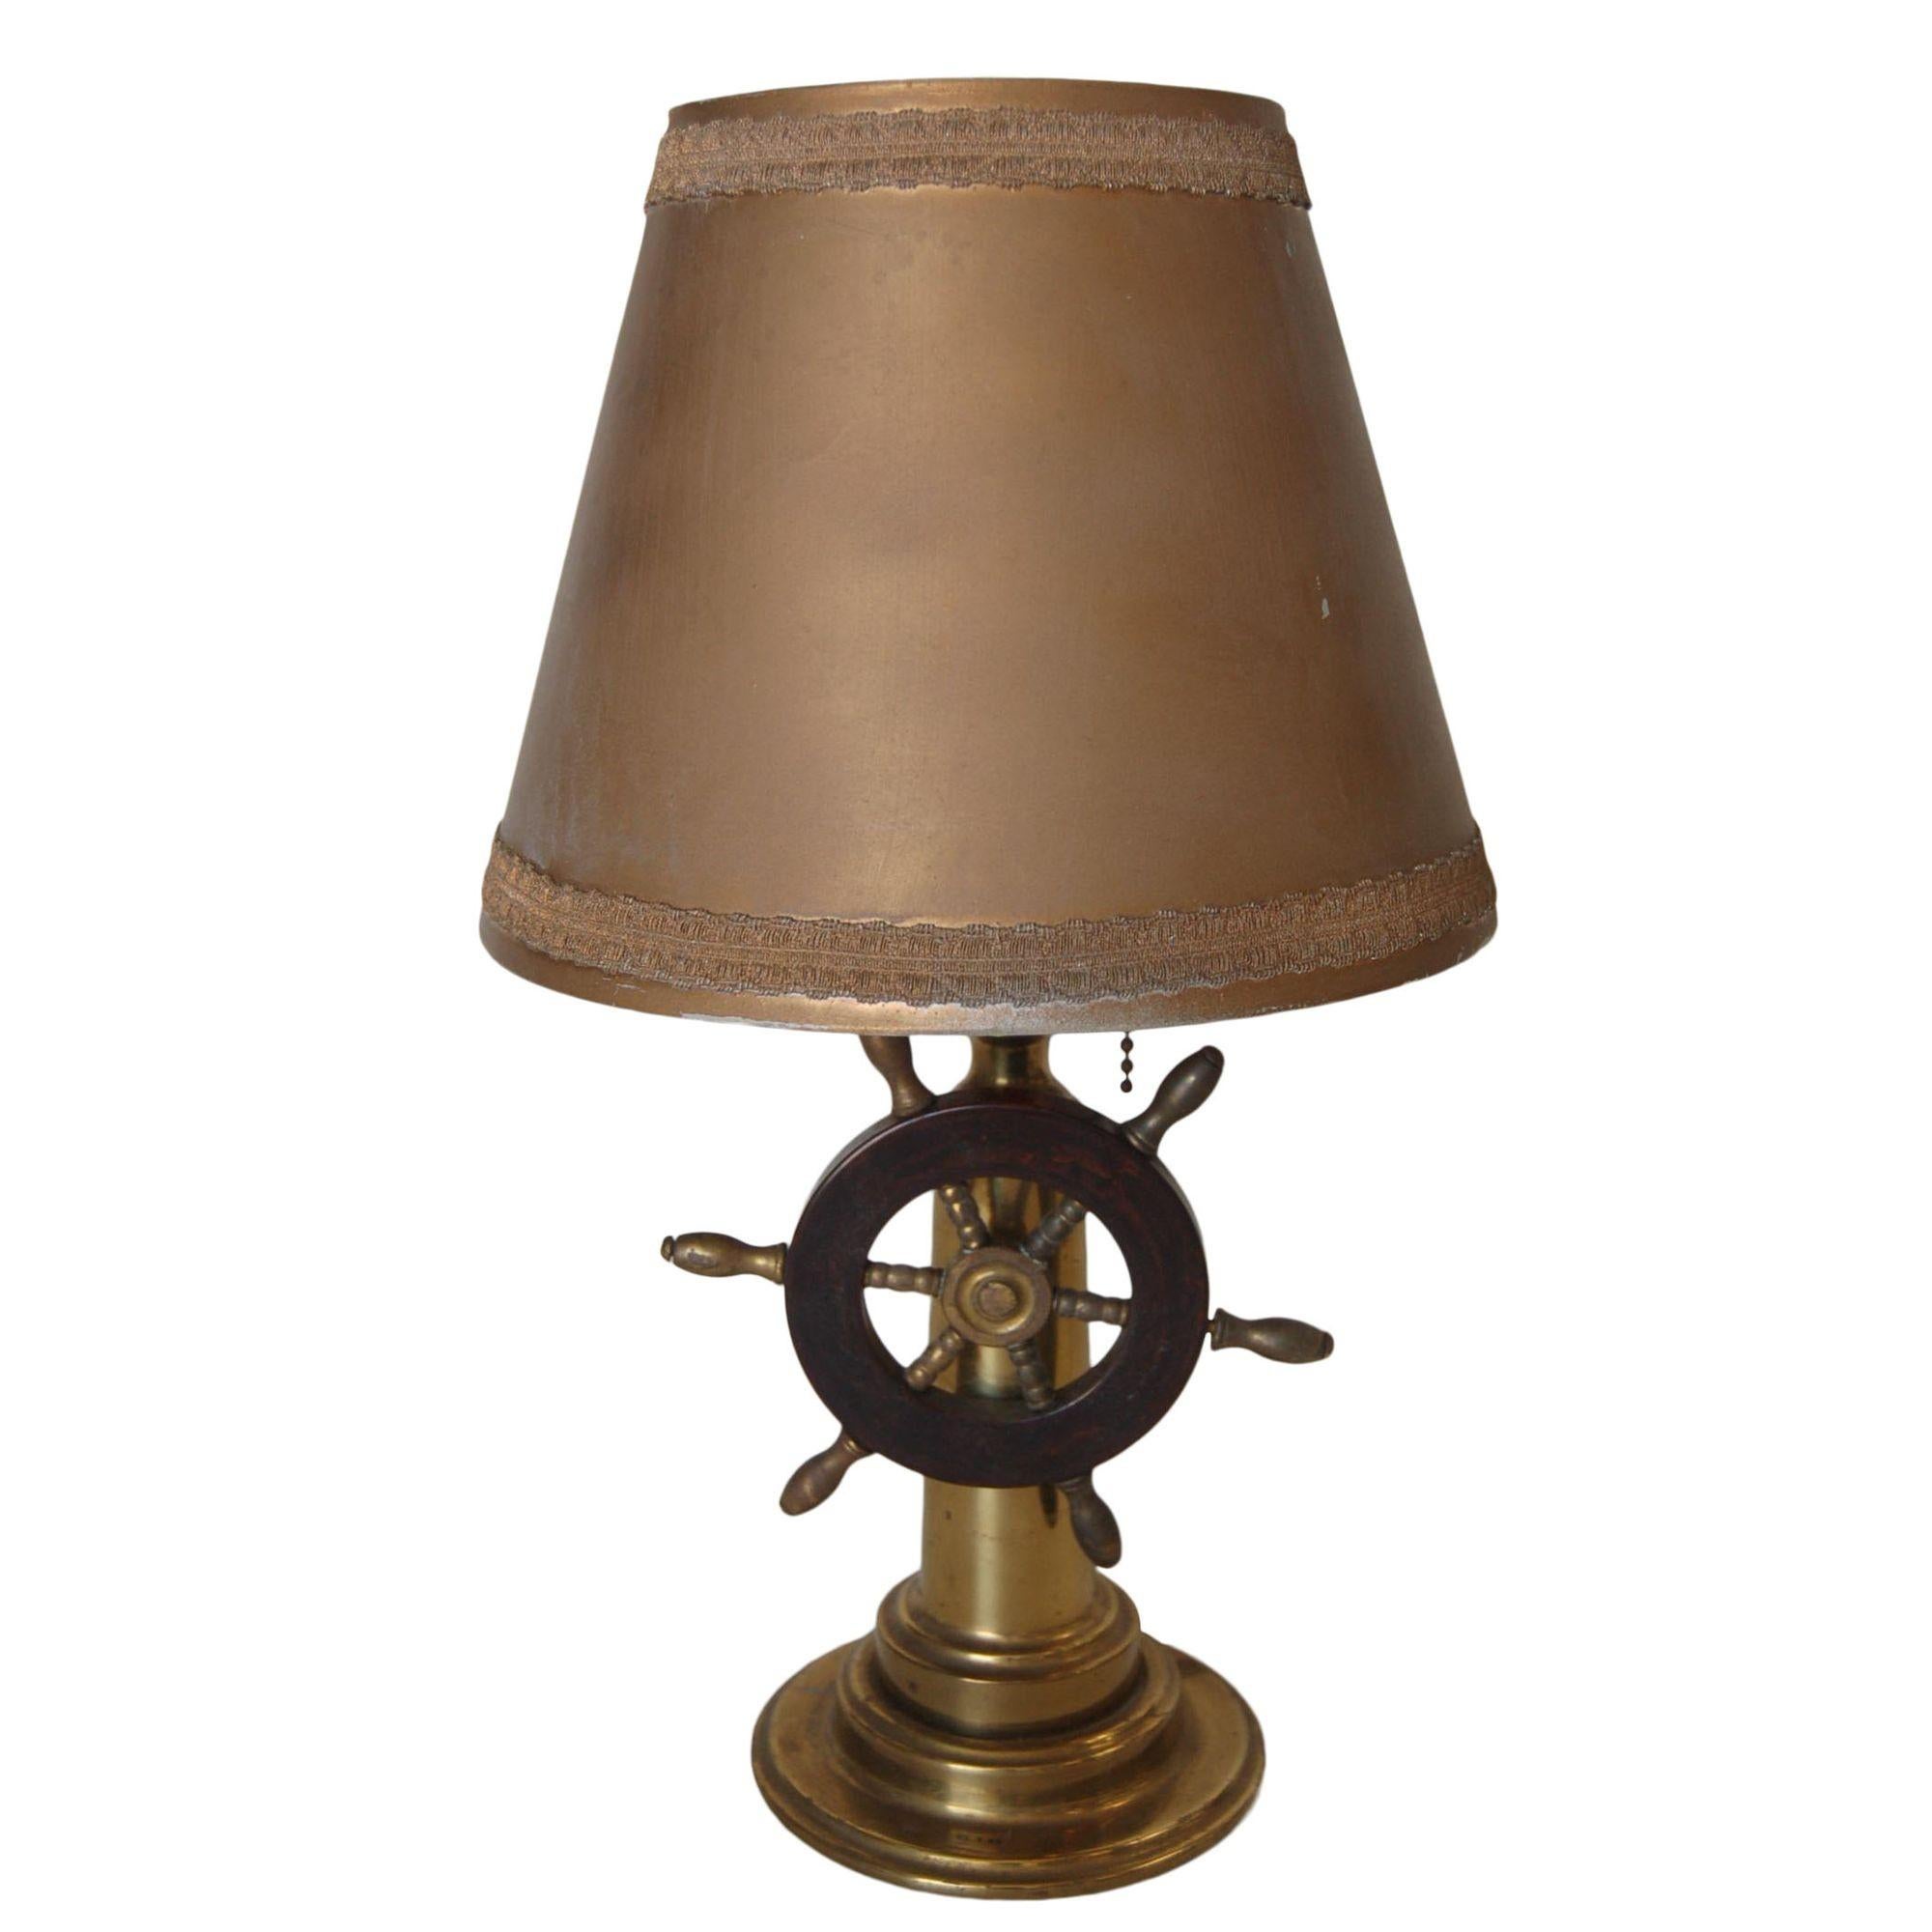 Nautical Brass and Bakelite Ships Wheel Helm Table Lamp In Excellent Condition For Sale In Van Nuys, CA